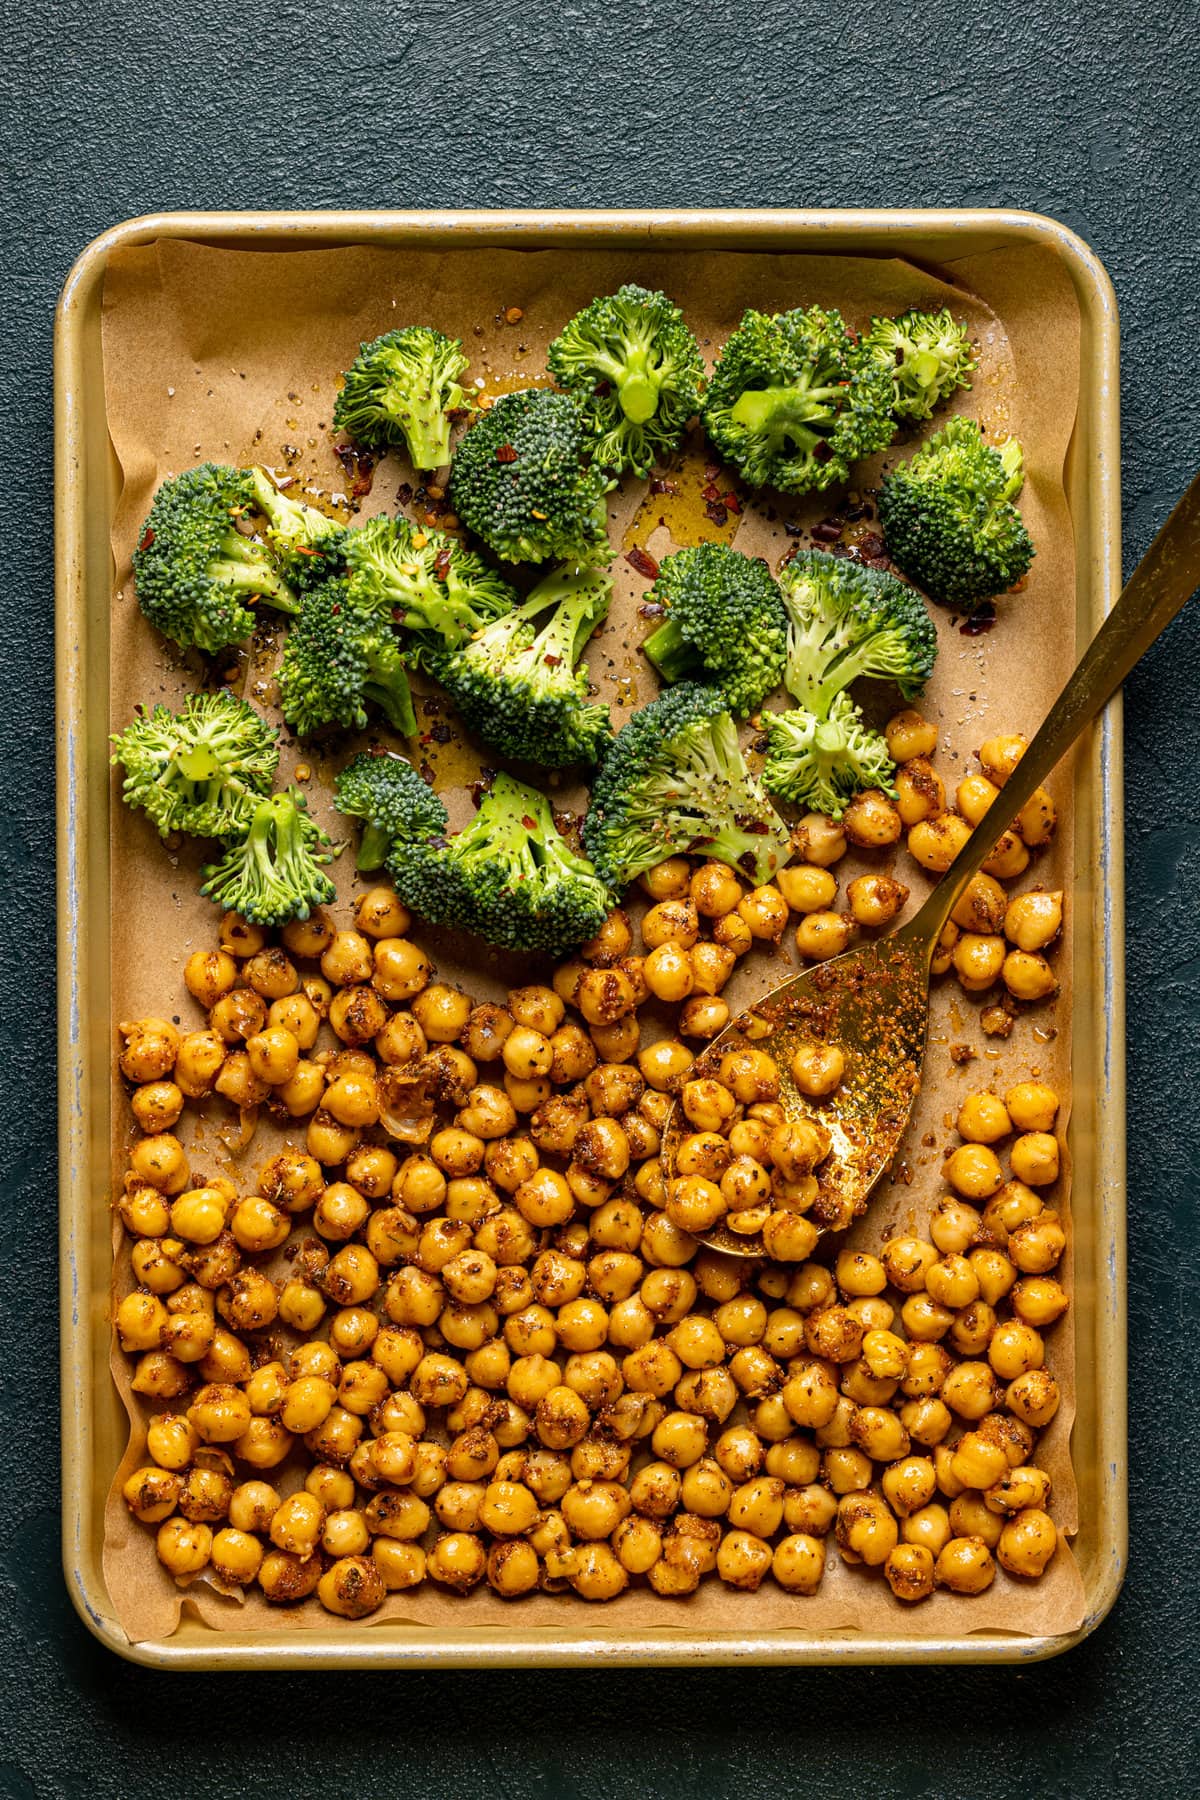 Broccoli and chickpeas on a baking tray with a spoon